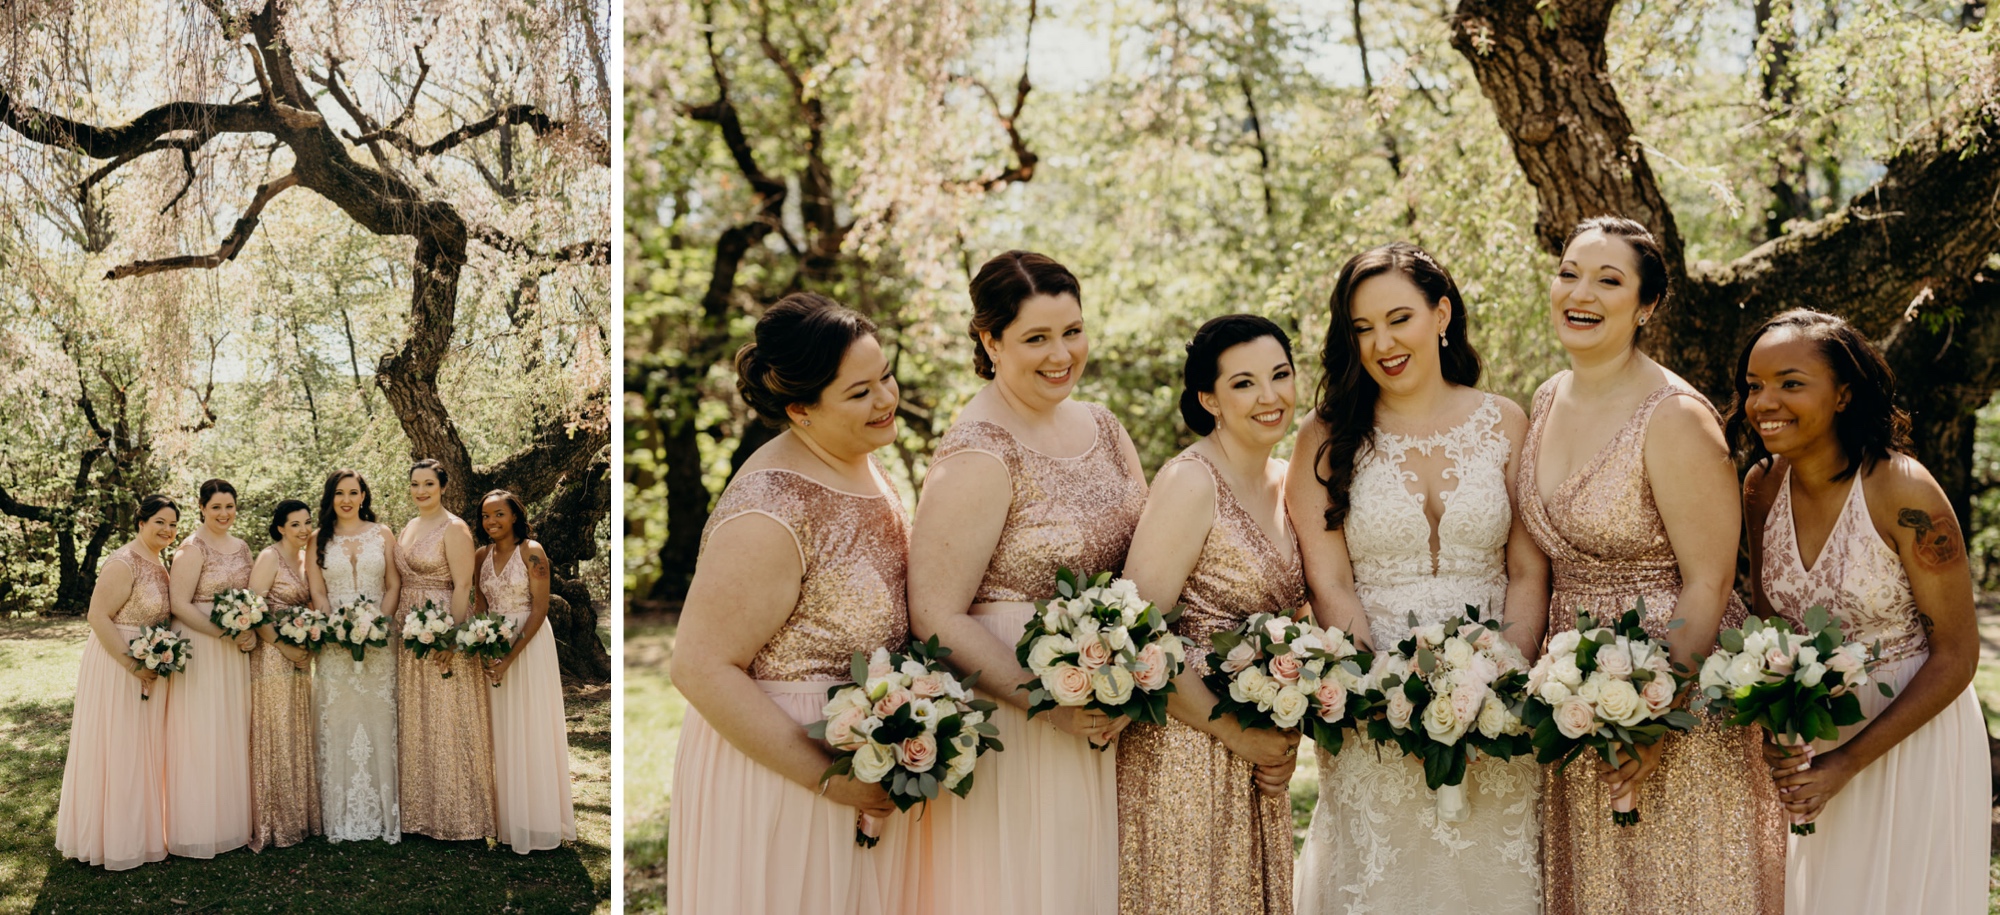 portrait of a bride and her bridesmaids at a park in new jersey